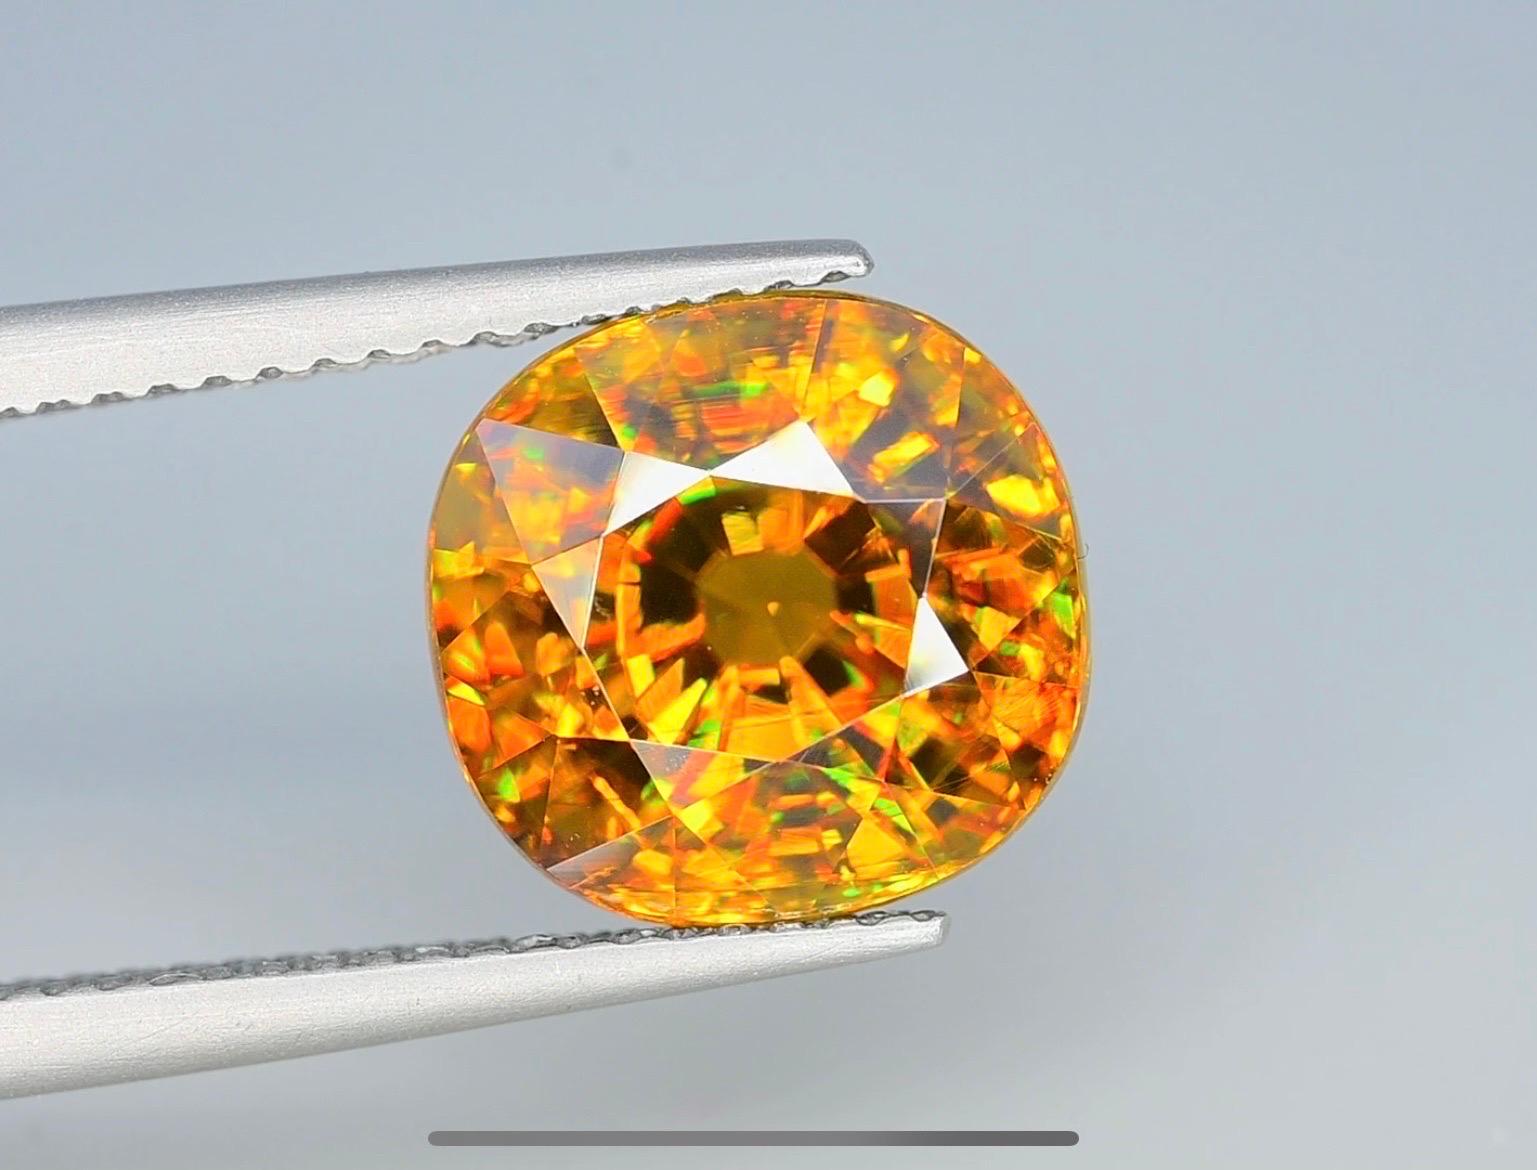 Introducing a stunning 6.6 carat VVS sphene titanite, radiating with a mesmerizing golden hue. Witness its breathtaking fire and remarkable clarity. A true embodiment of elegance and brilliance. Don’t miss the chance to own this exquisite